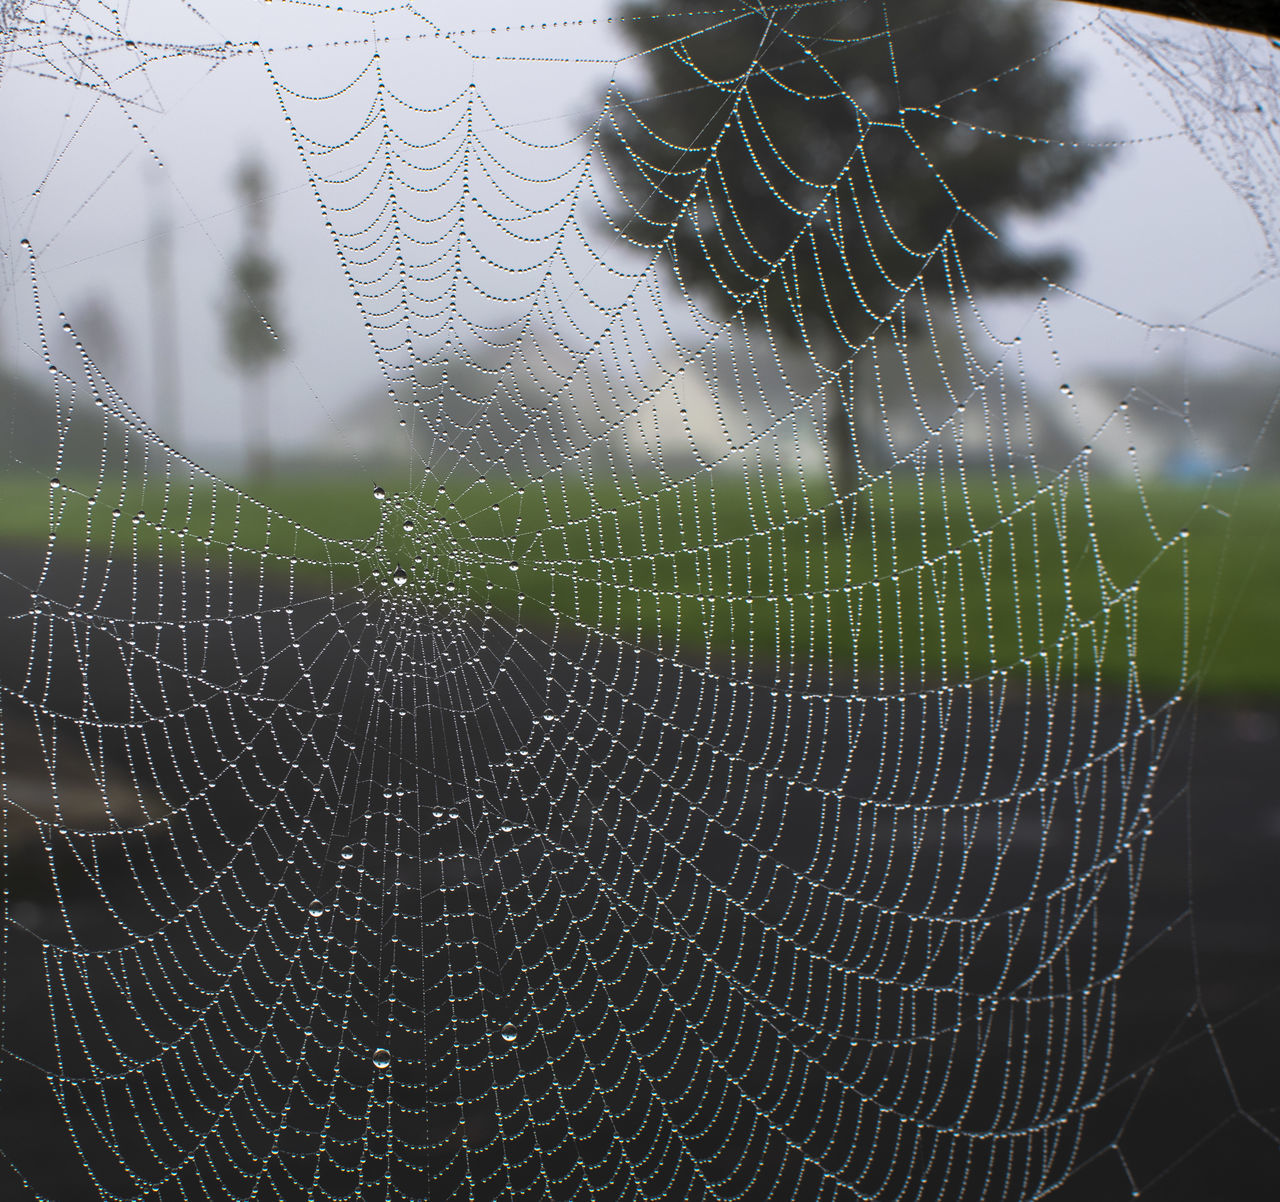 CLOSE-UP OF SPIDER WEB IN A DARK